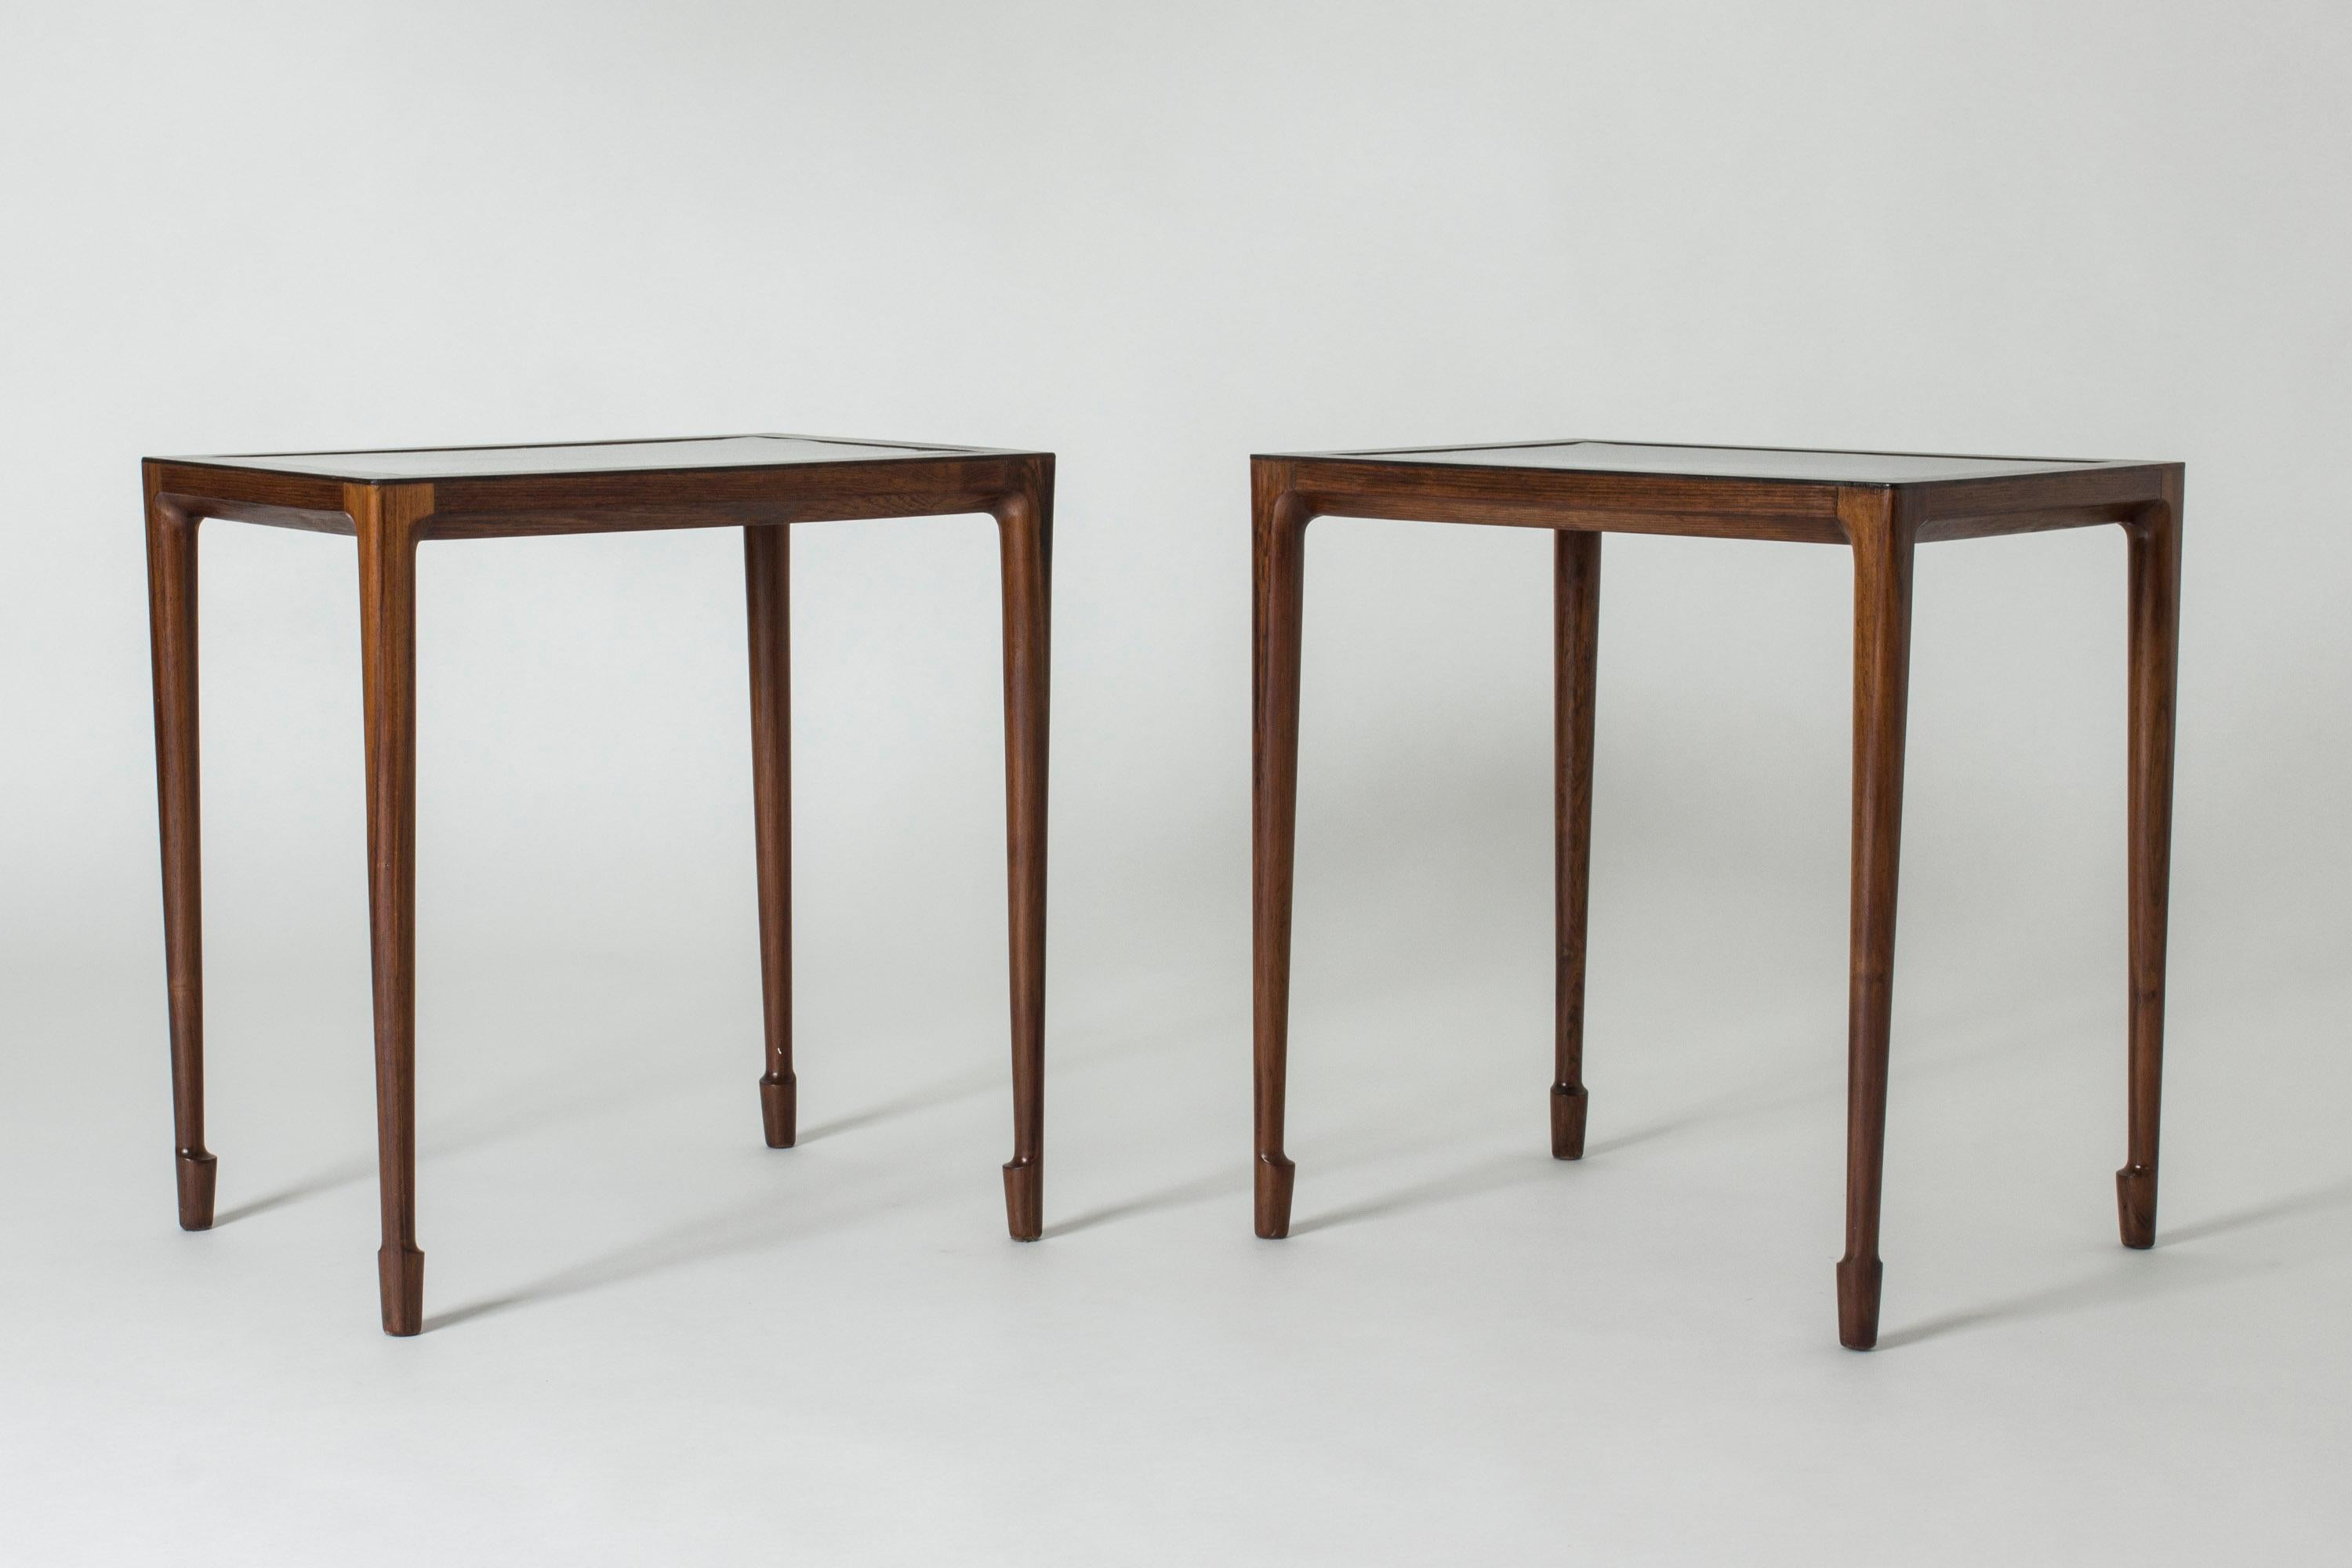 Pair of elegant rosewood side tables by Bernt Petersen, with inlayed Formica tops. Amazing slender design with beautifully sculpted feet.